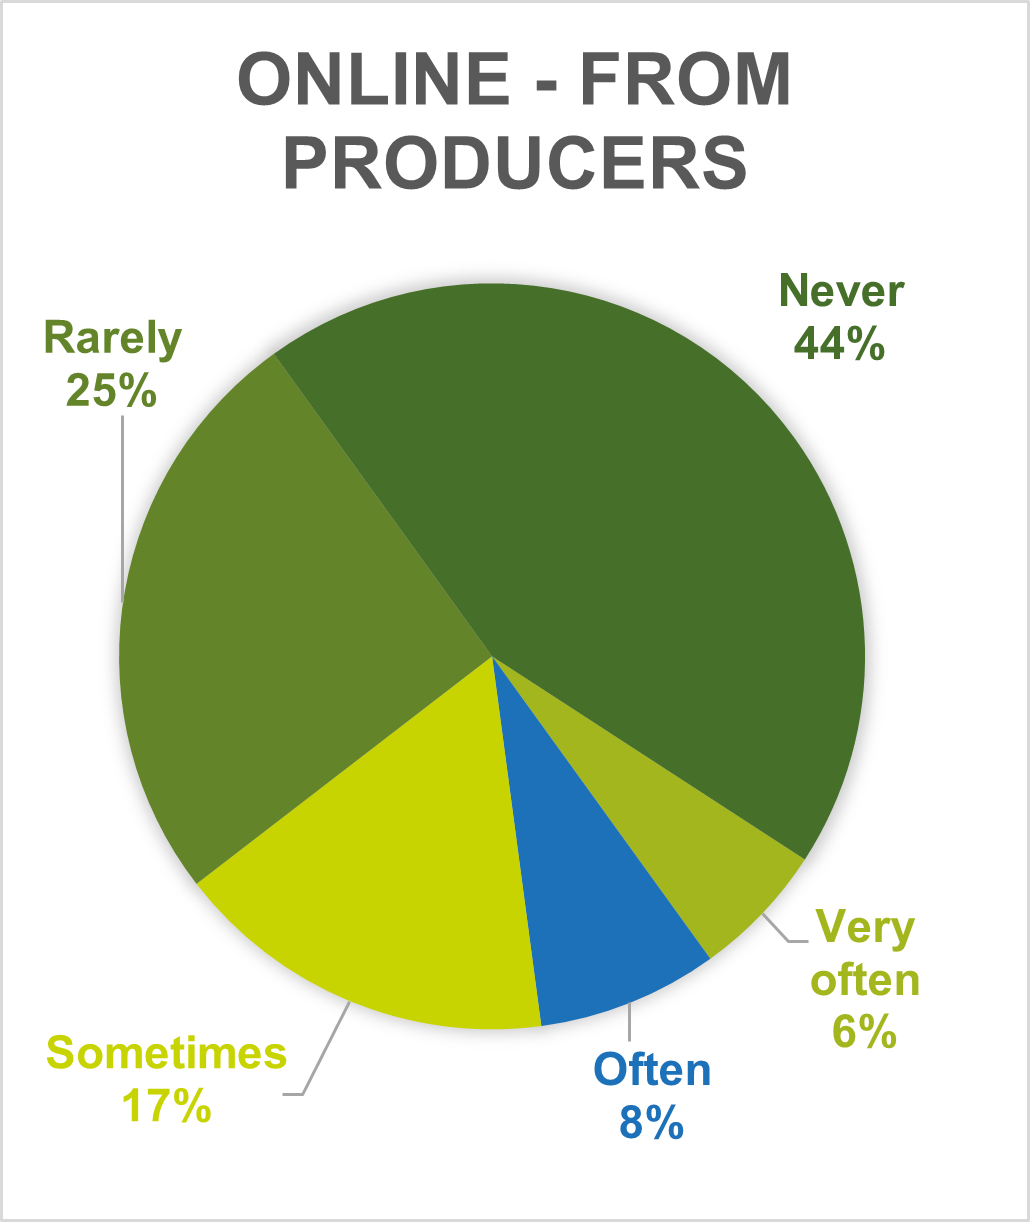 Pie chart showing frquency of shopping online from producers